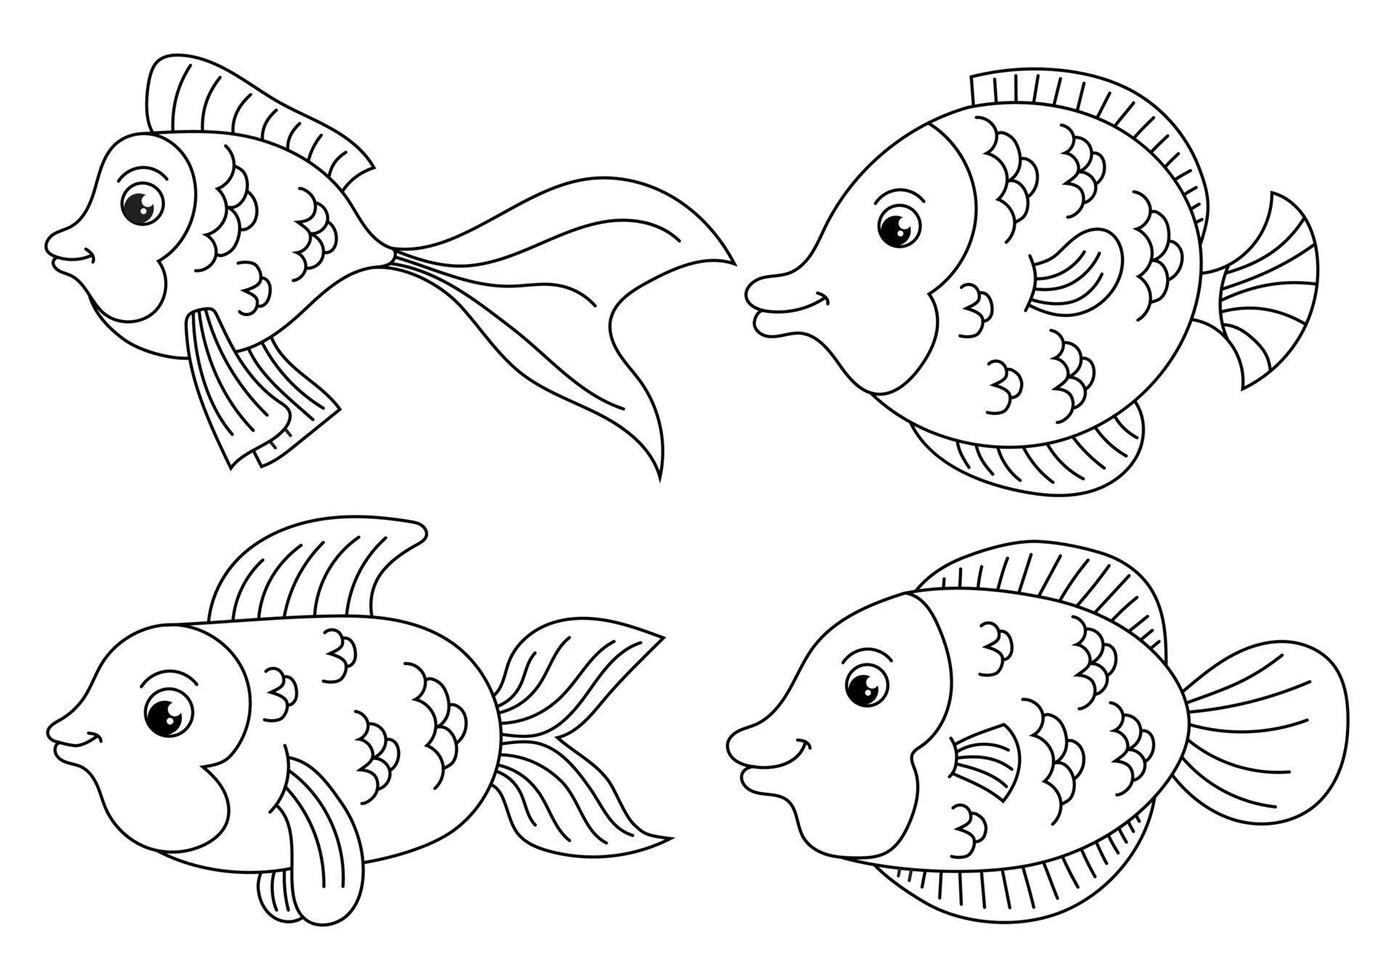 Outlined cartoon sea animals set for drawing. Coloring page of funny fishes vector